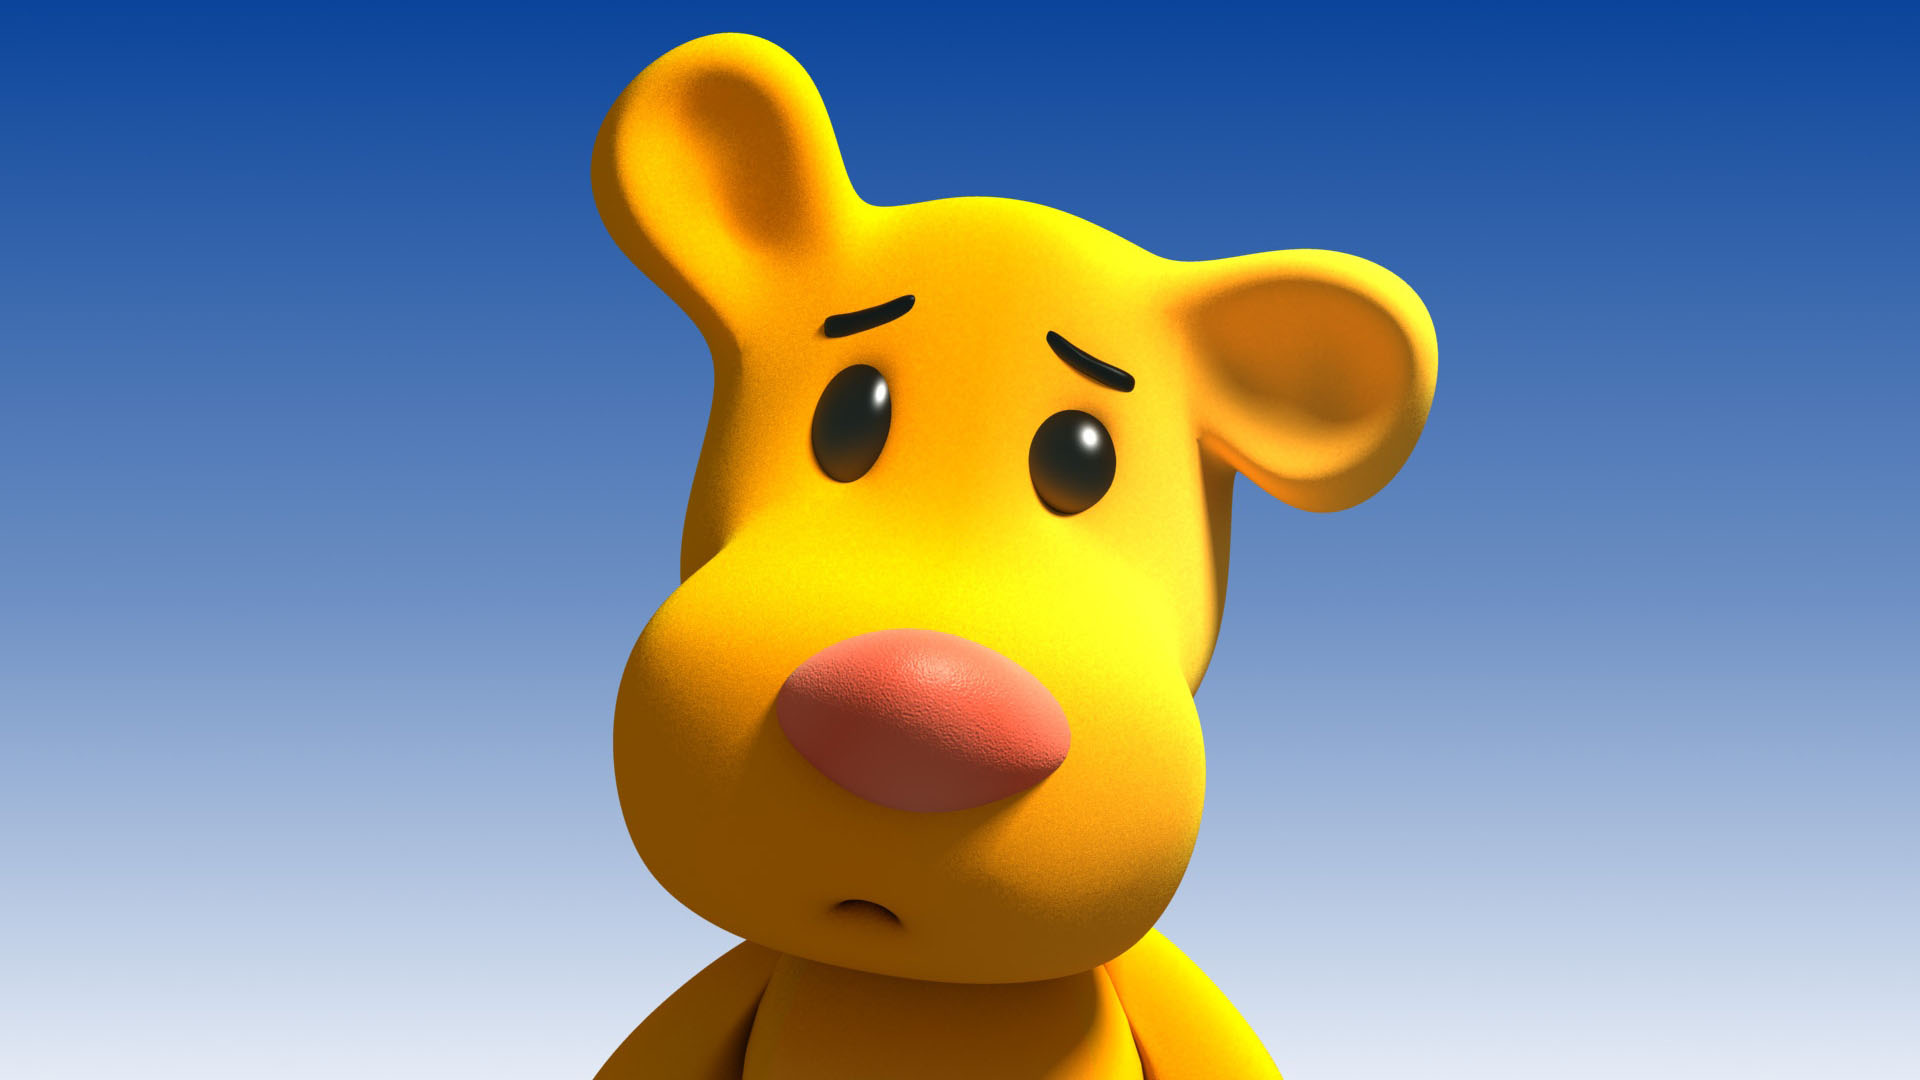 full hd 3d wallpapers 1920x1080,animated cartoon,yellow,cartoon,animation,snout